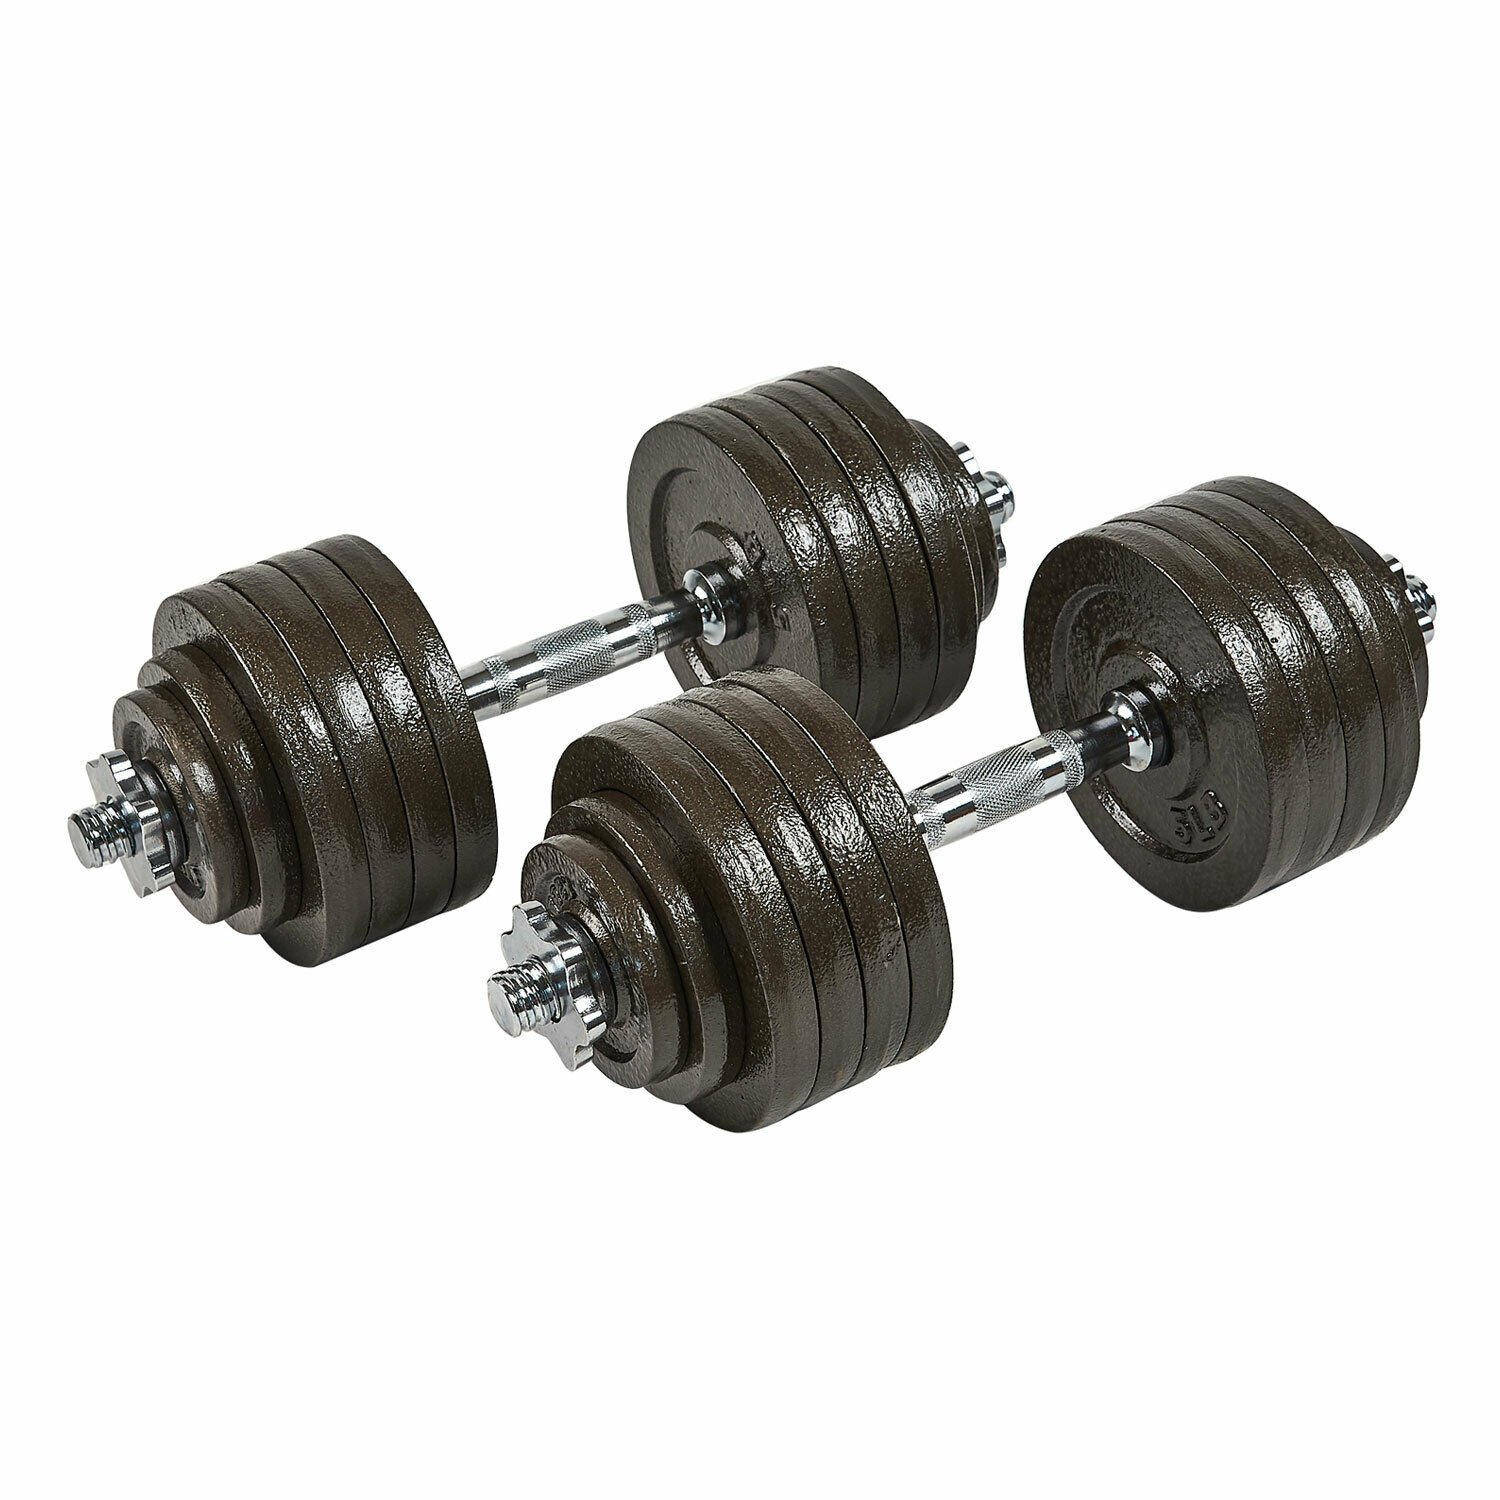 105 Pound Adjustable Weight Dumbbell Set with Cast Iron Plates Pair